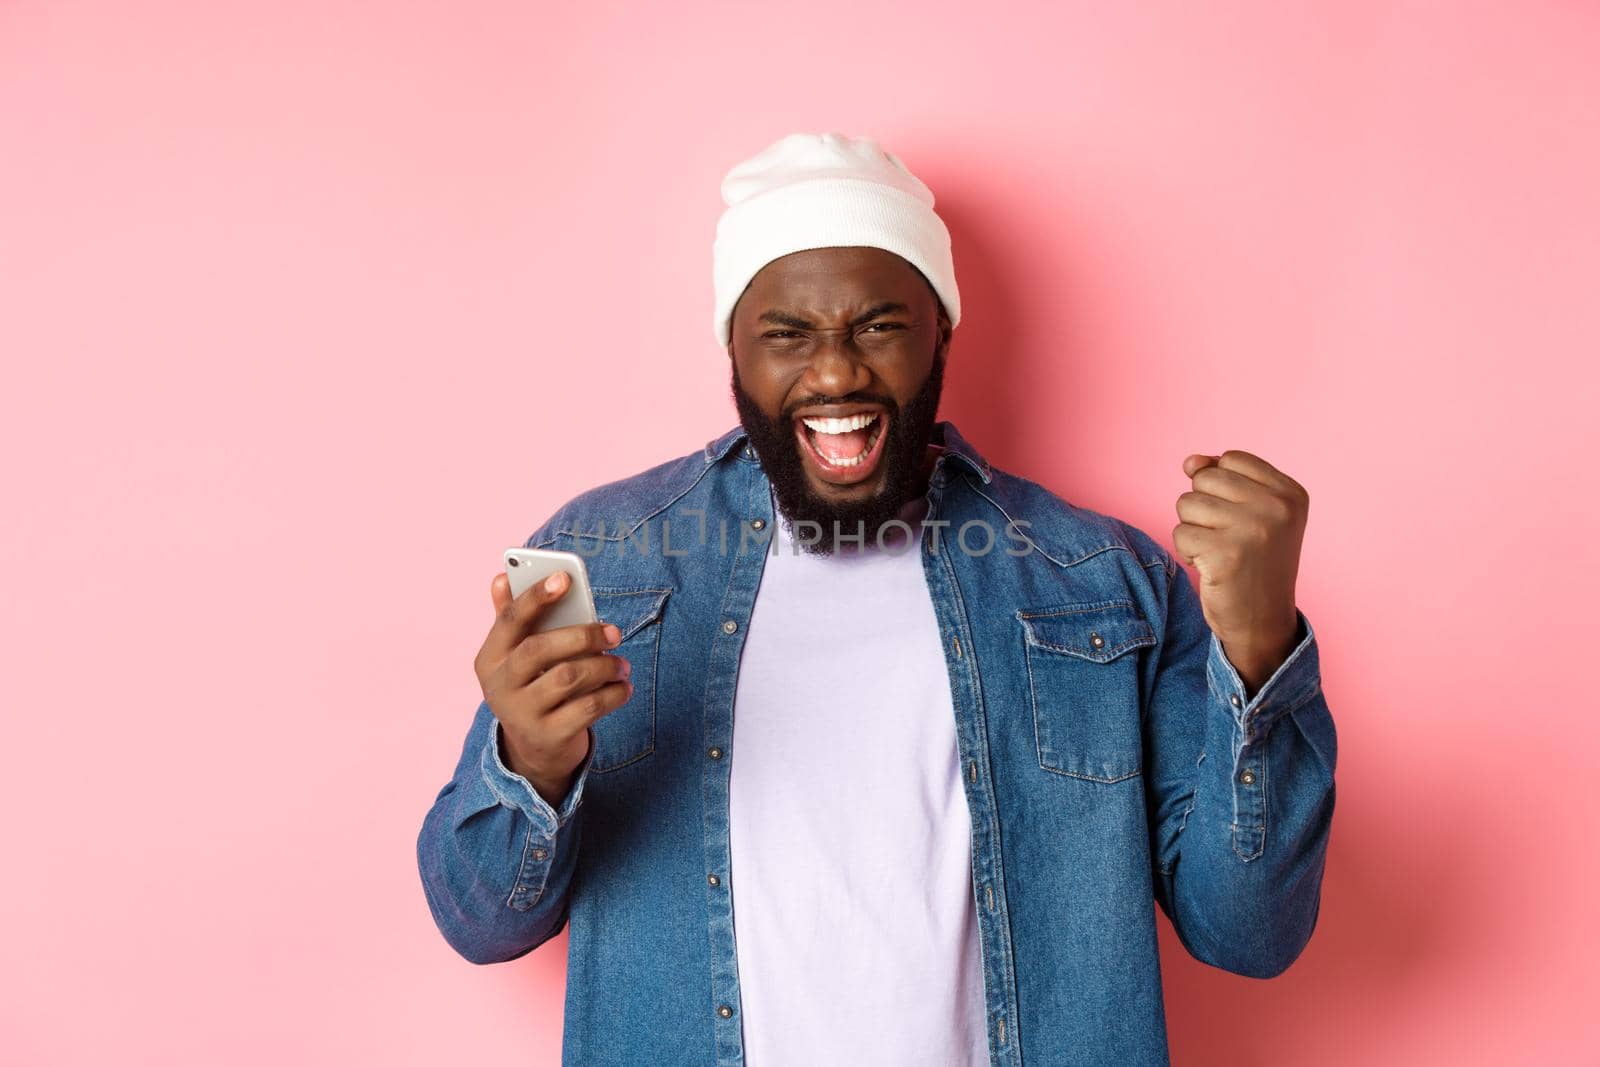 Technology and online shopping concept. Happy Black man rejoicing, winning in app, holding smartphone and scream yes, standing over pink background.